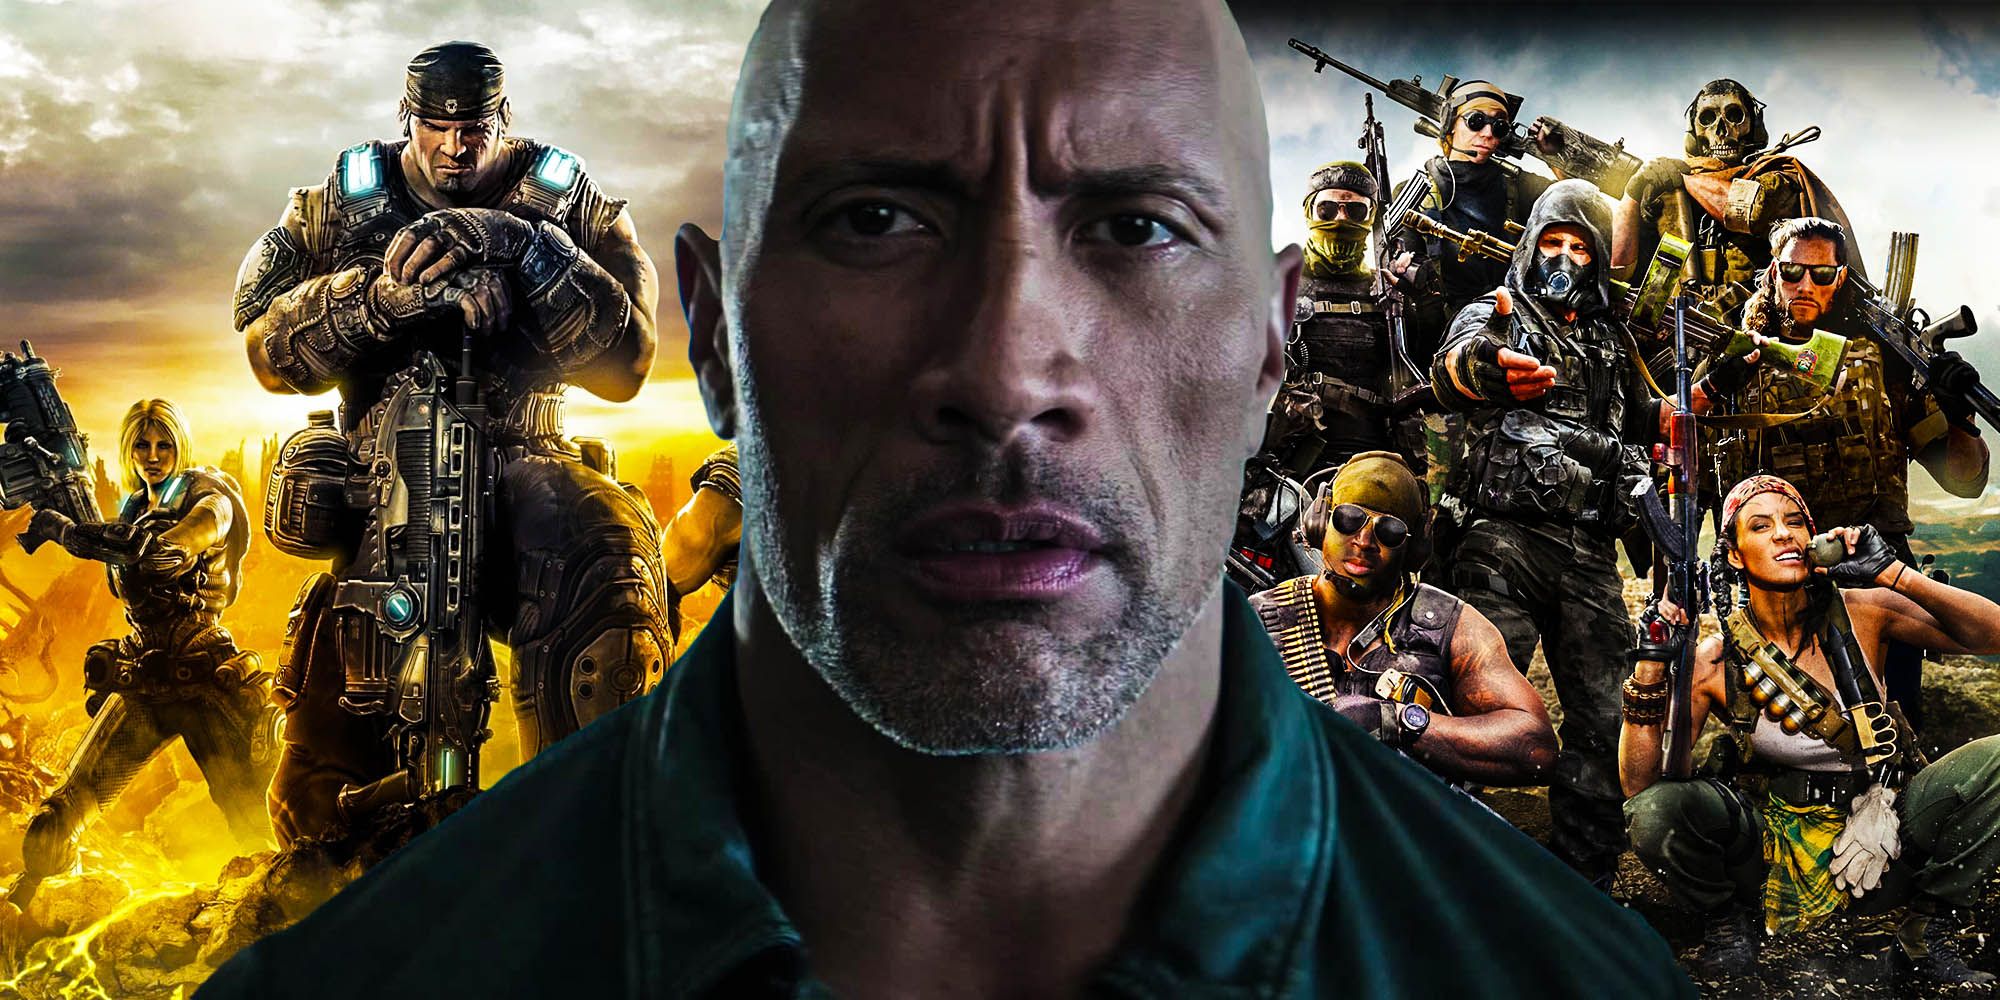 Gears of war a better video game movie for the rock than Call of duty